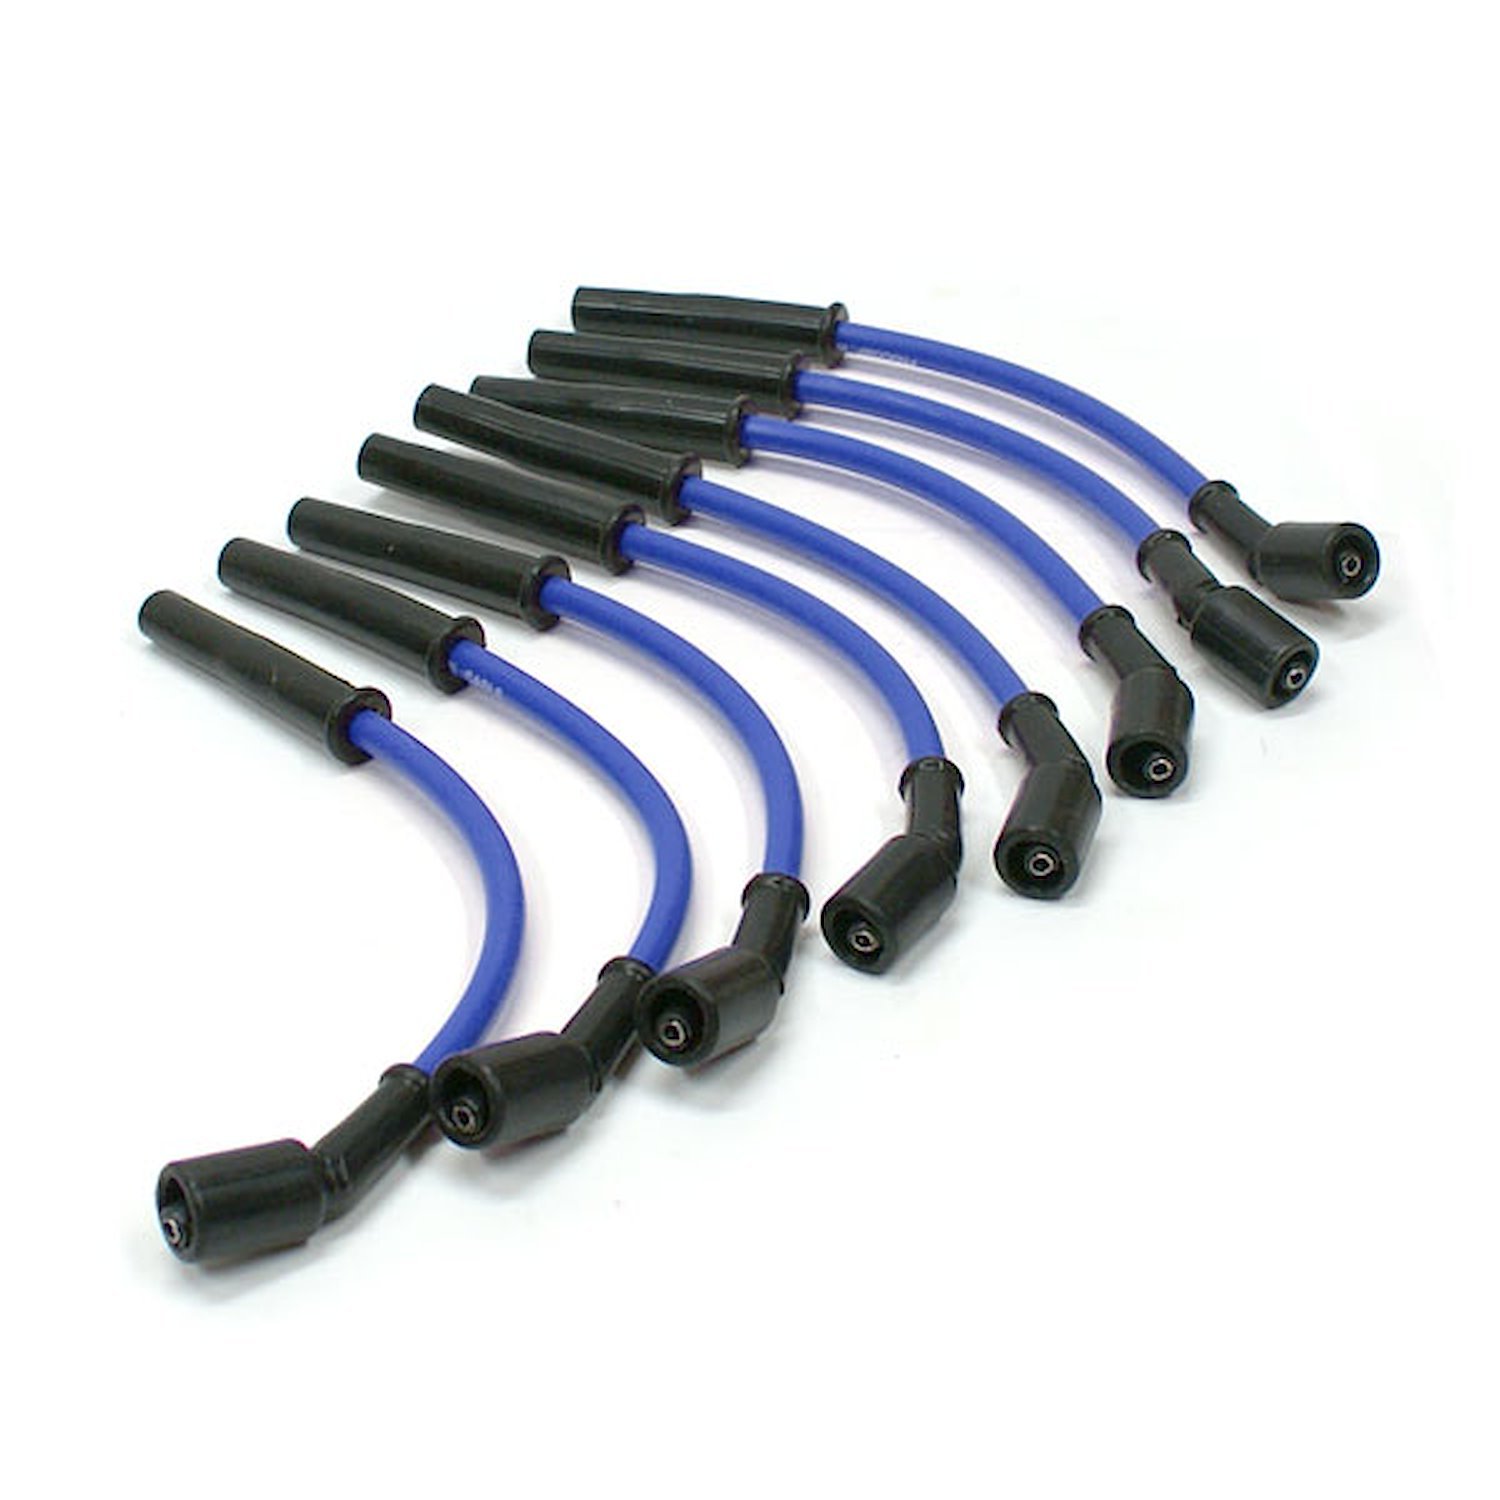 CHEVY LS1 LS2 LS3 LS6 - COIL ON COVER - BLUE SPARK PLUG WIRES